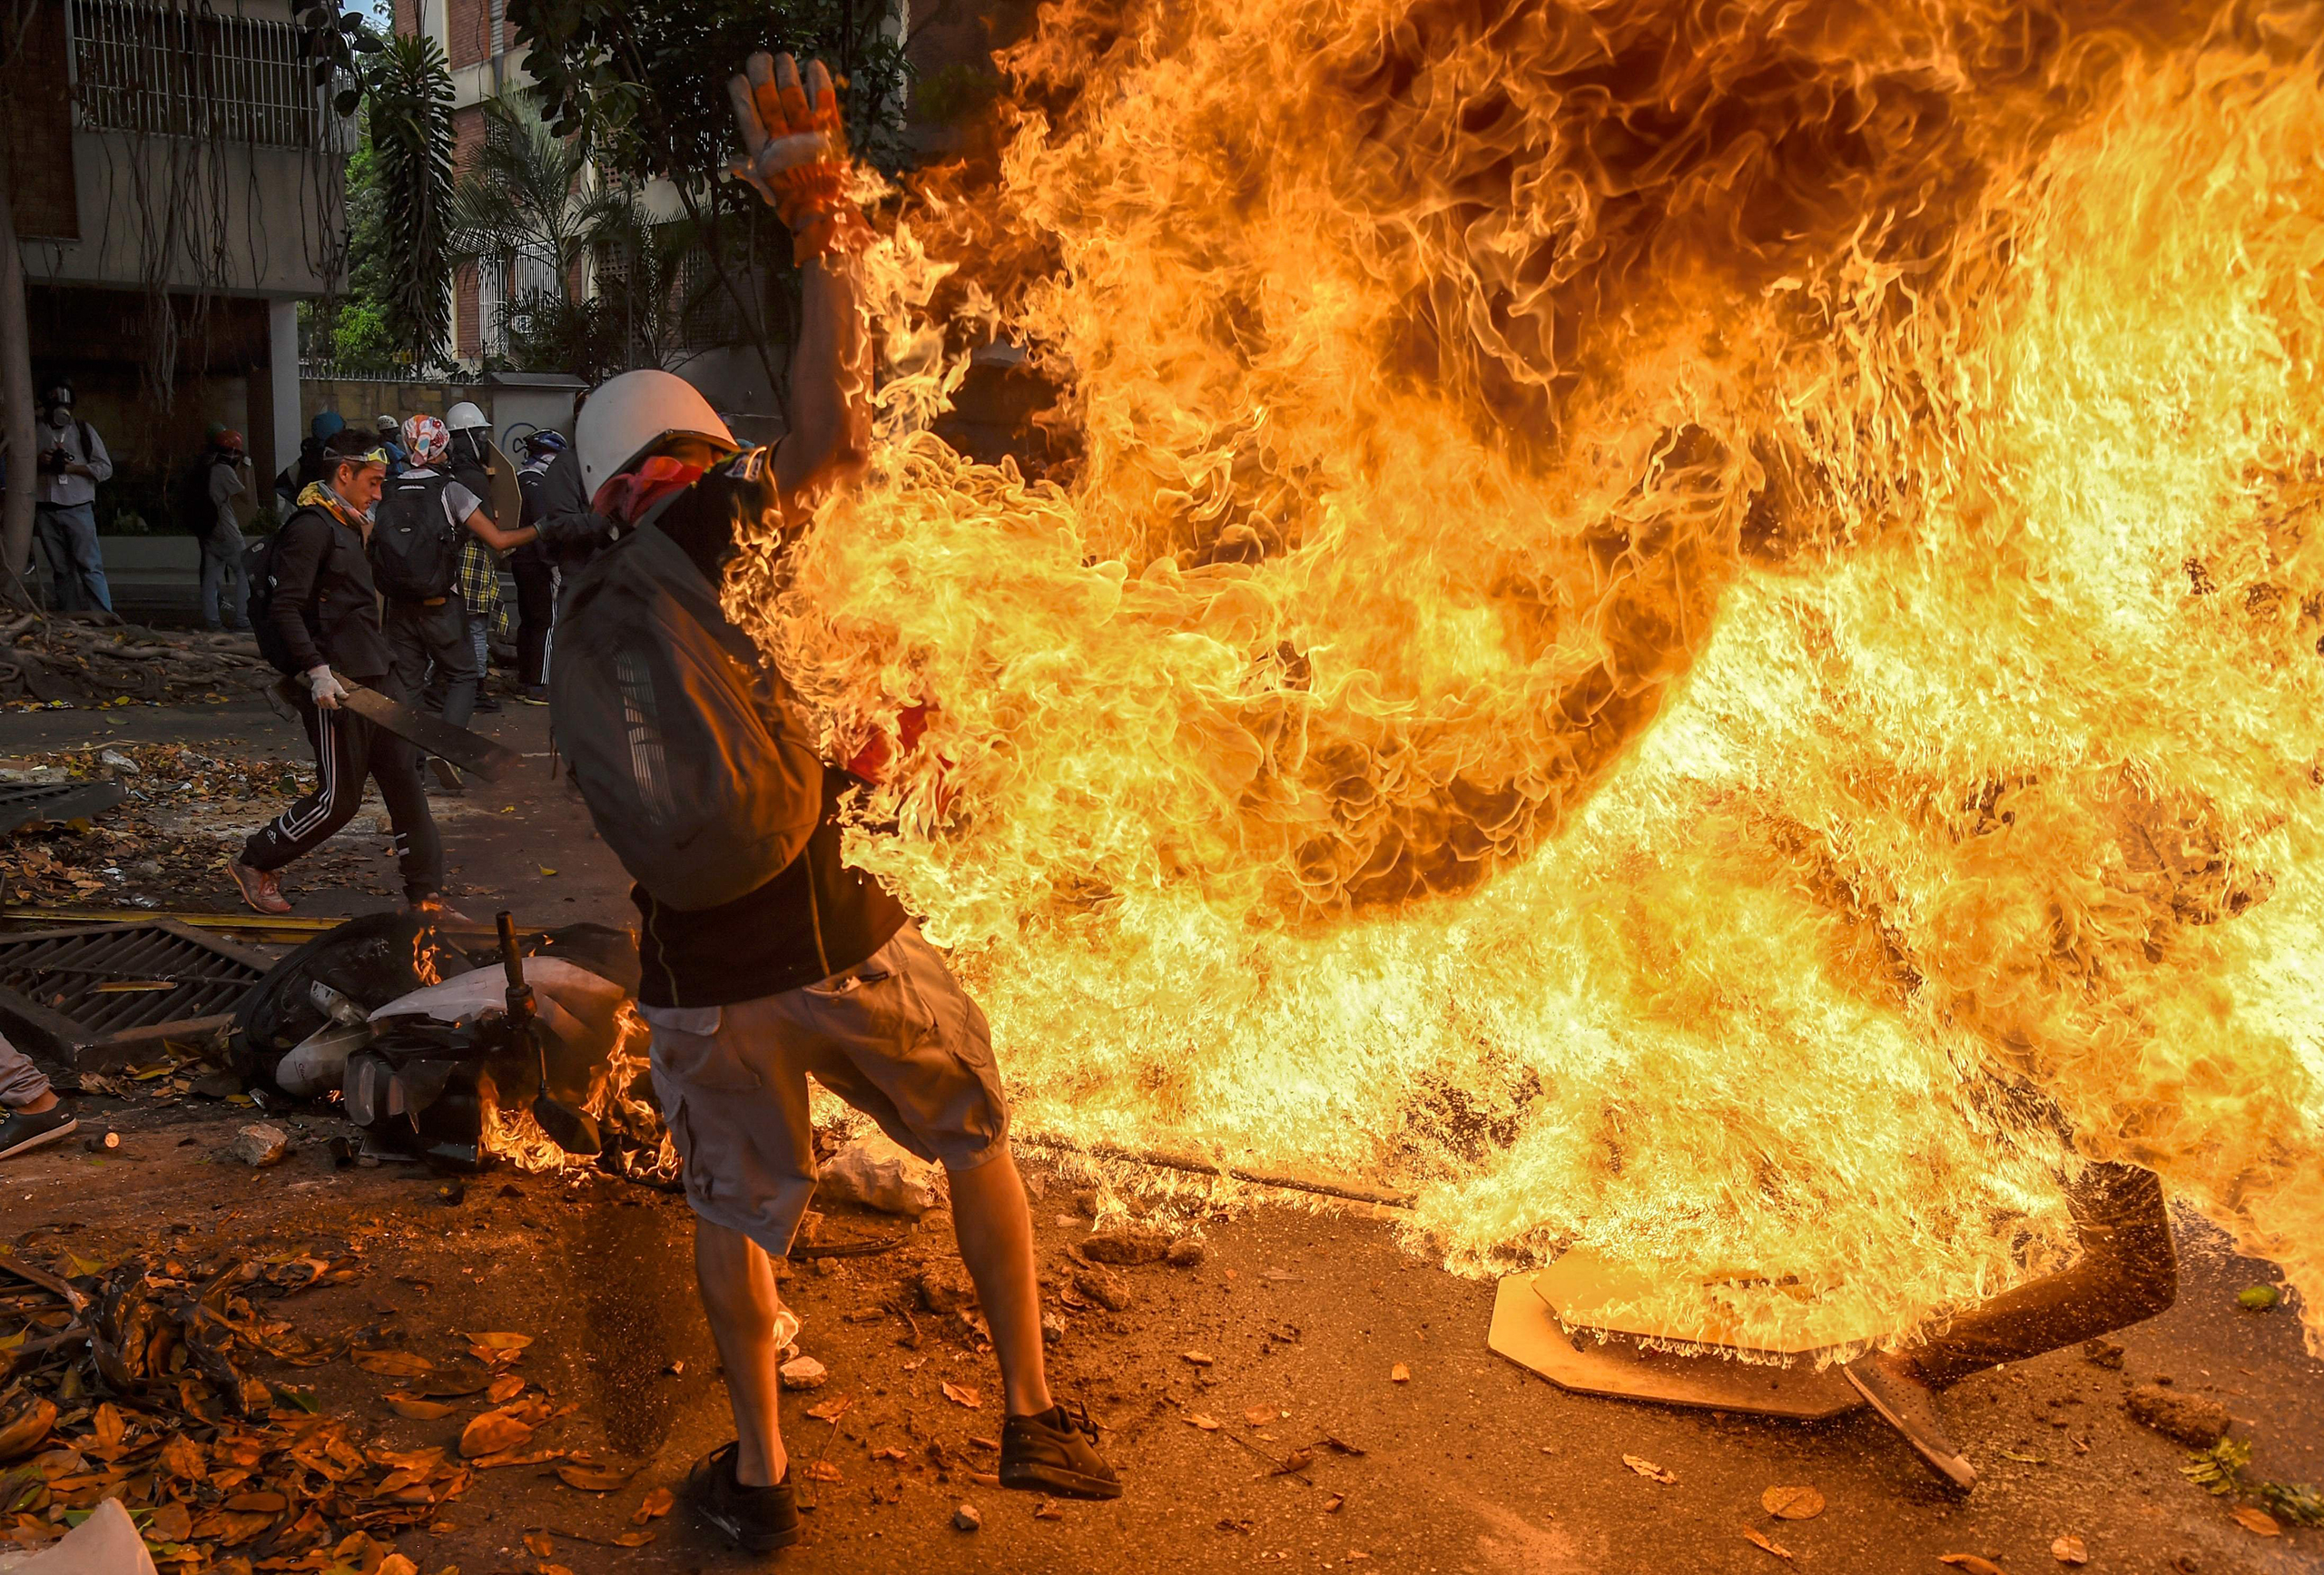 A man is engulfed in flames after the gas tank of a motorbike explodes in Caracas on May 3, 2017.